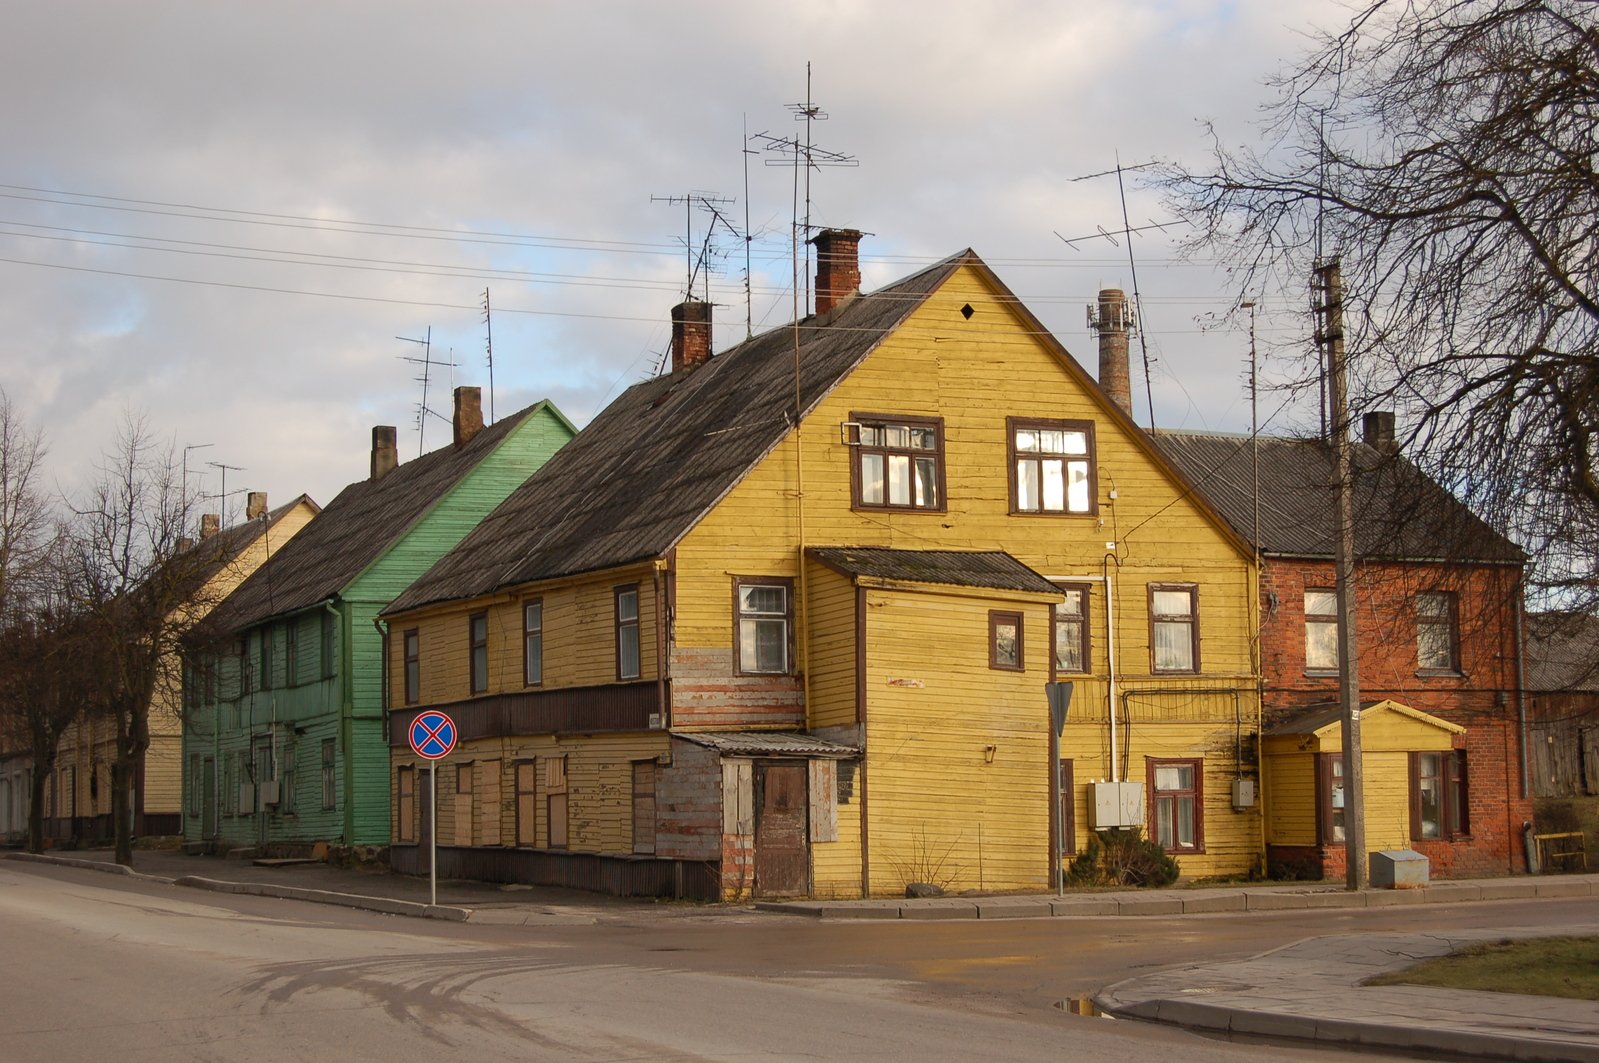 a row of houses painted yellow in the foreground